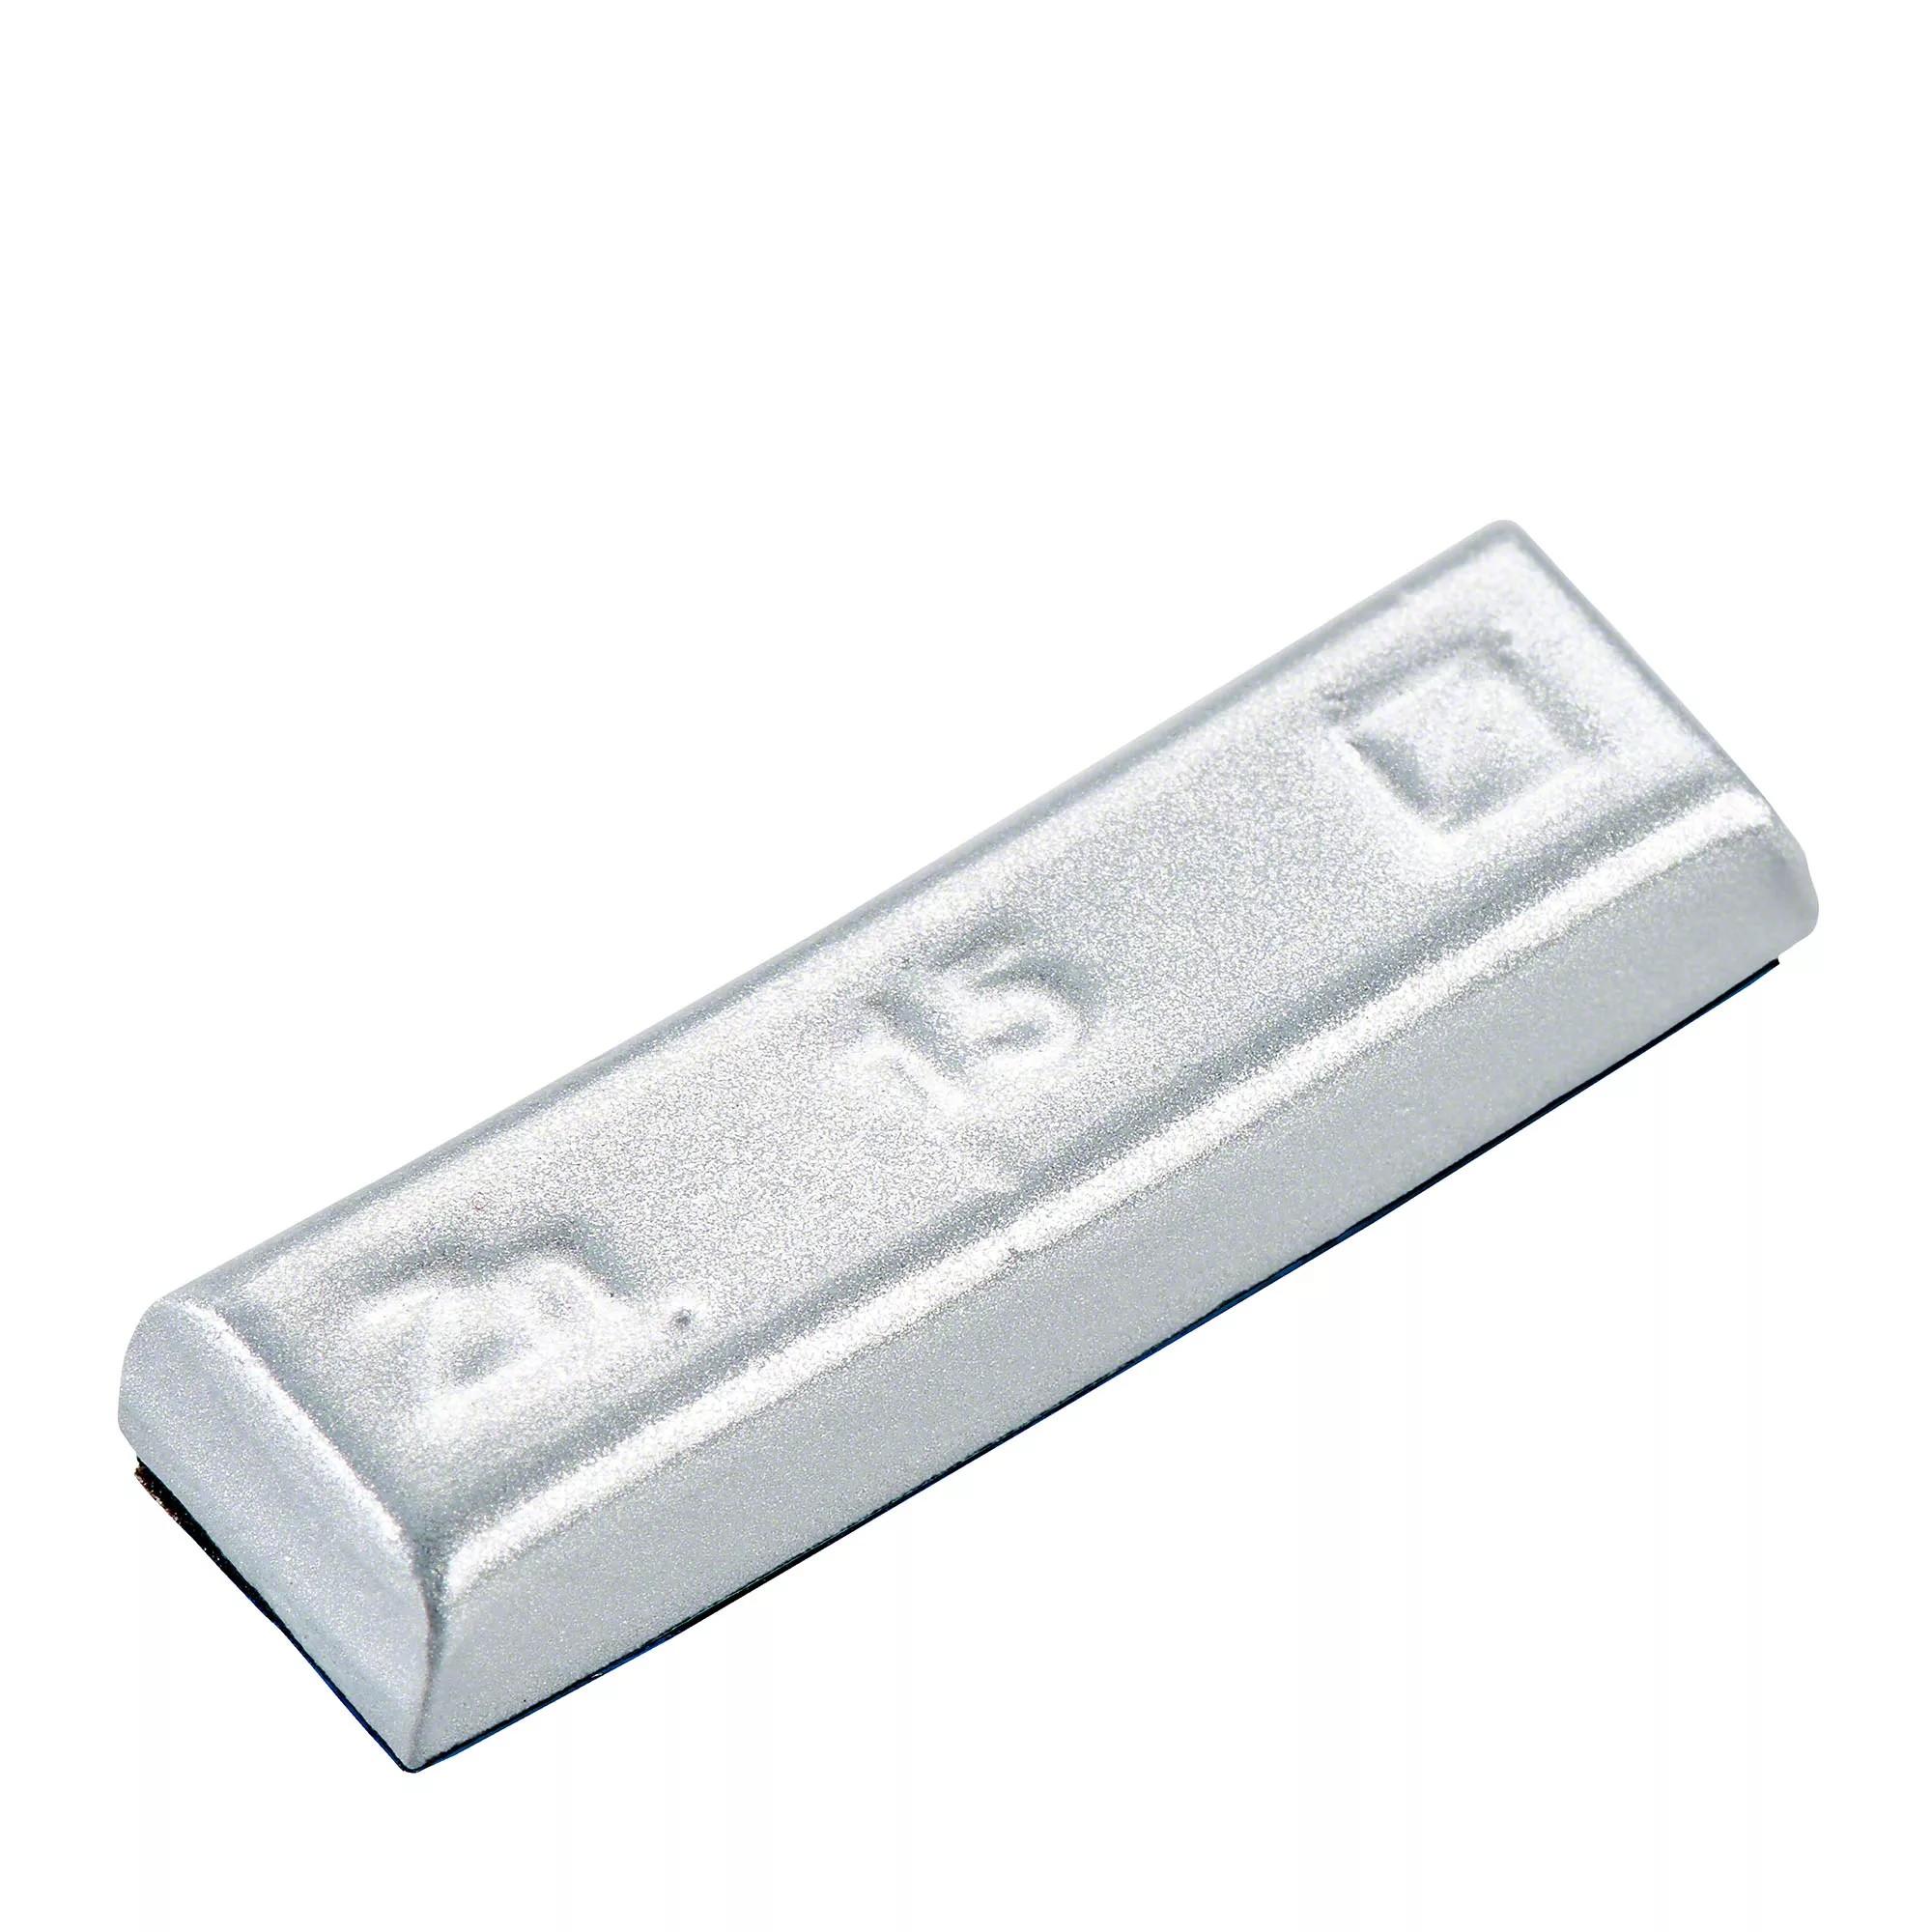 adhesive weight - Typ 799, 15 g, zinc, silver